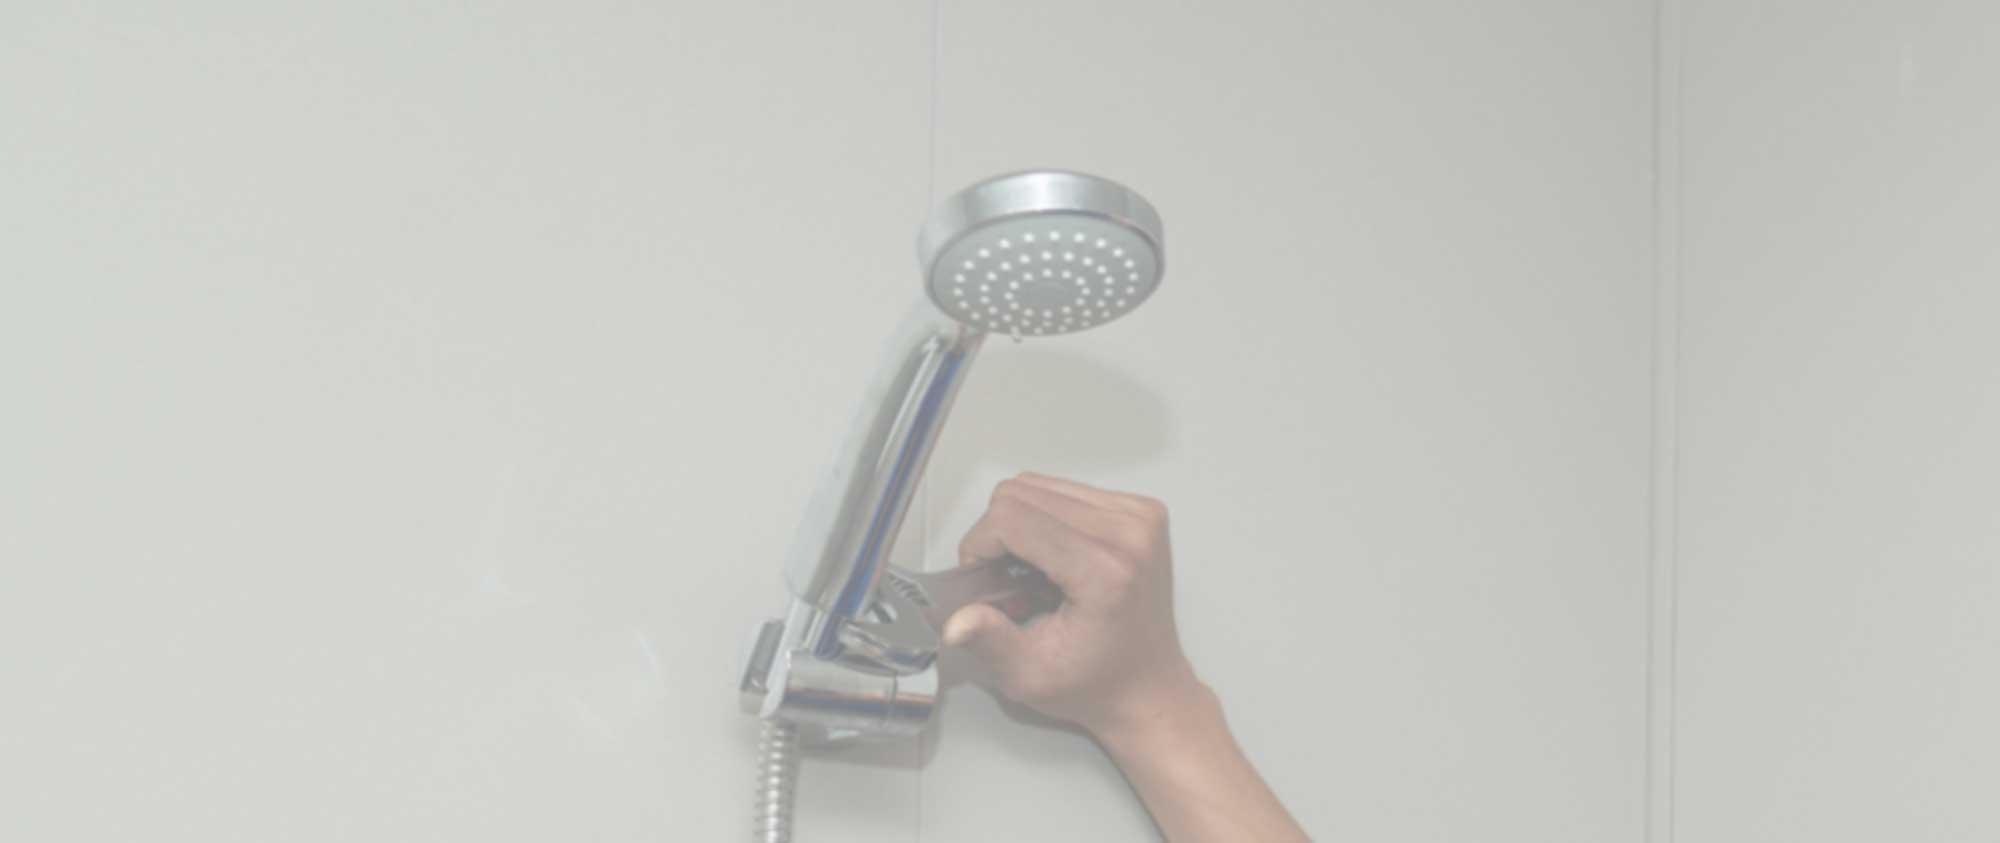 How to Fix a Leaky Shower